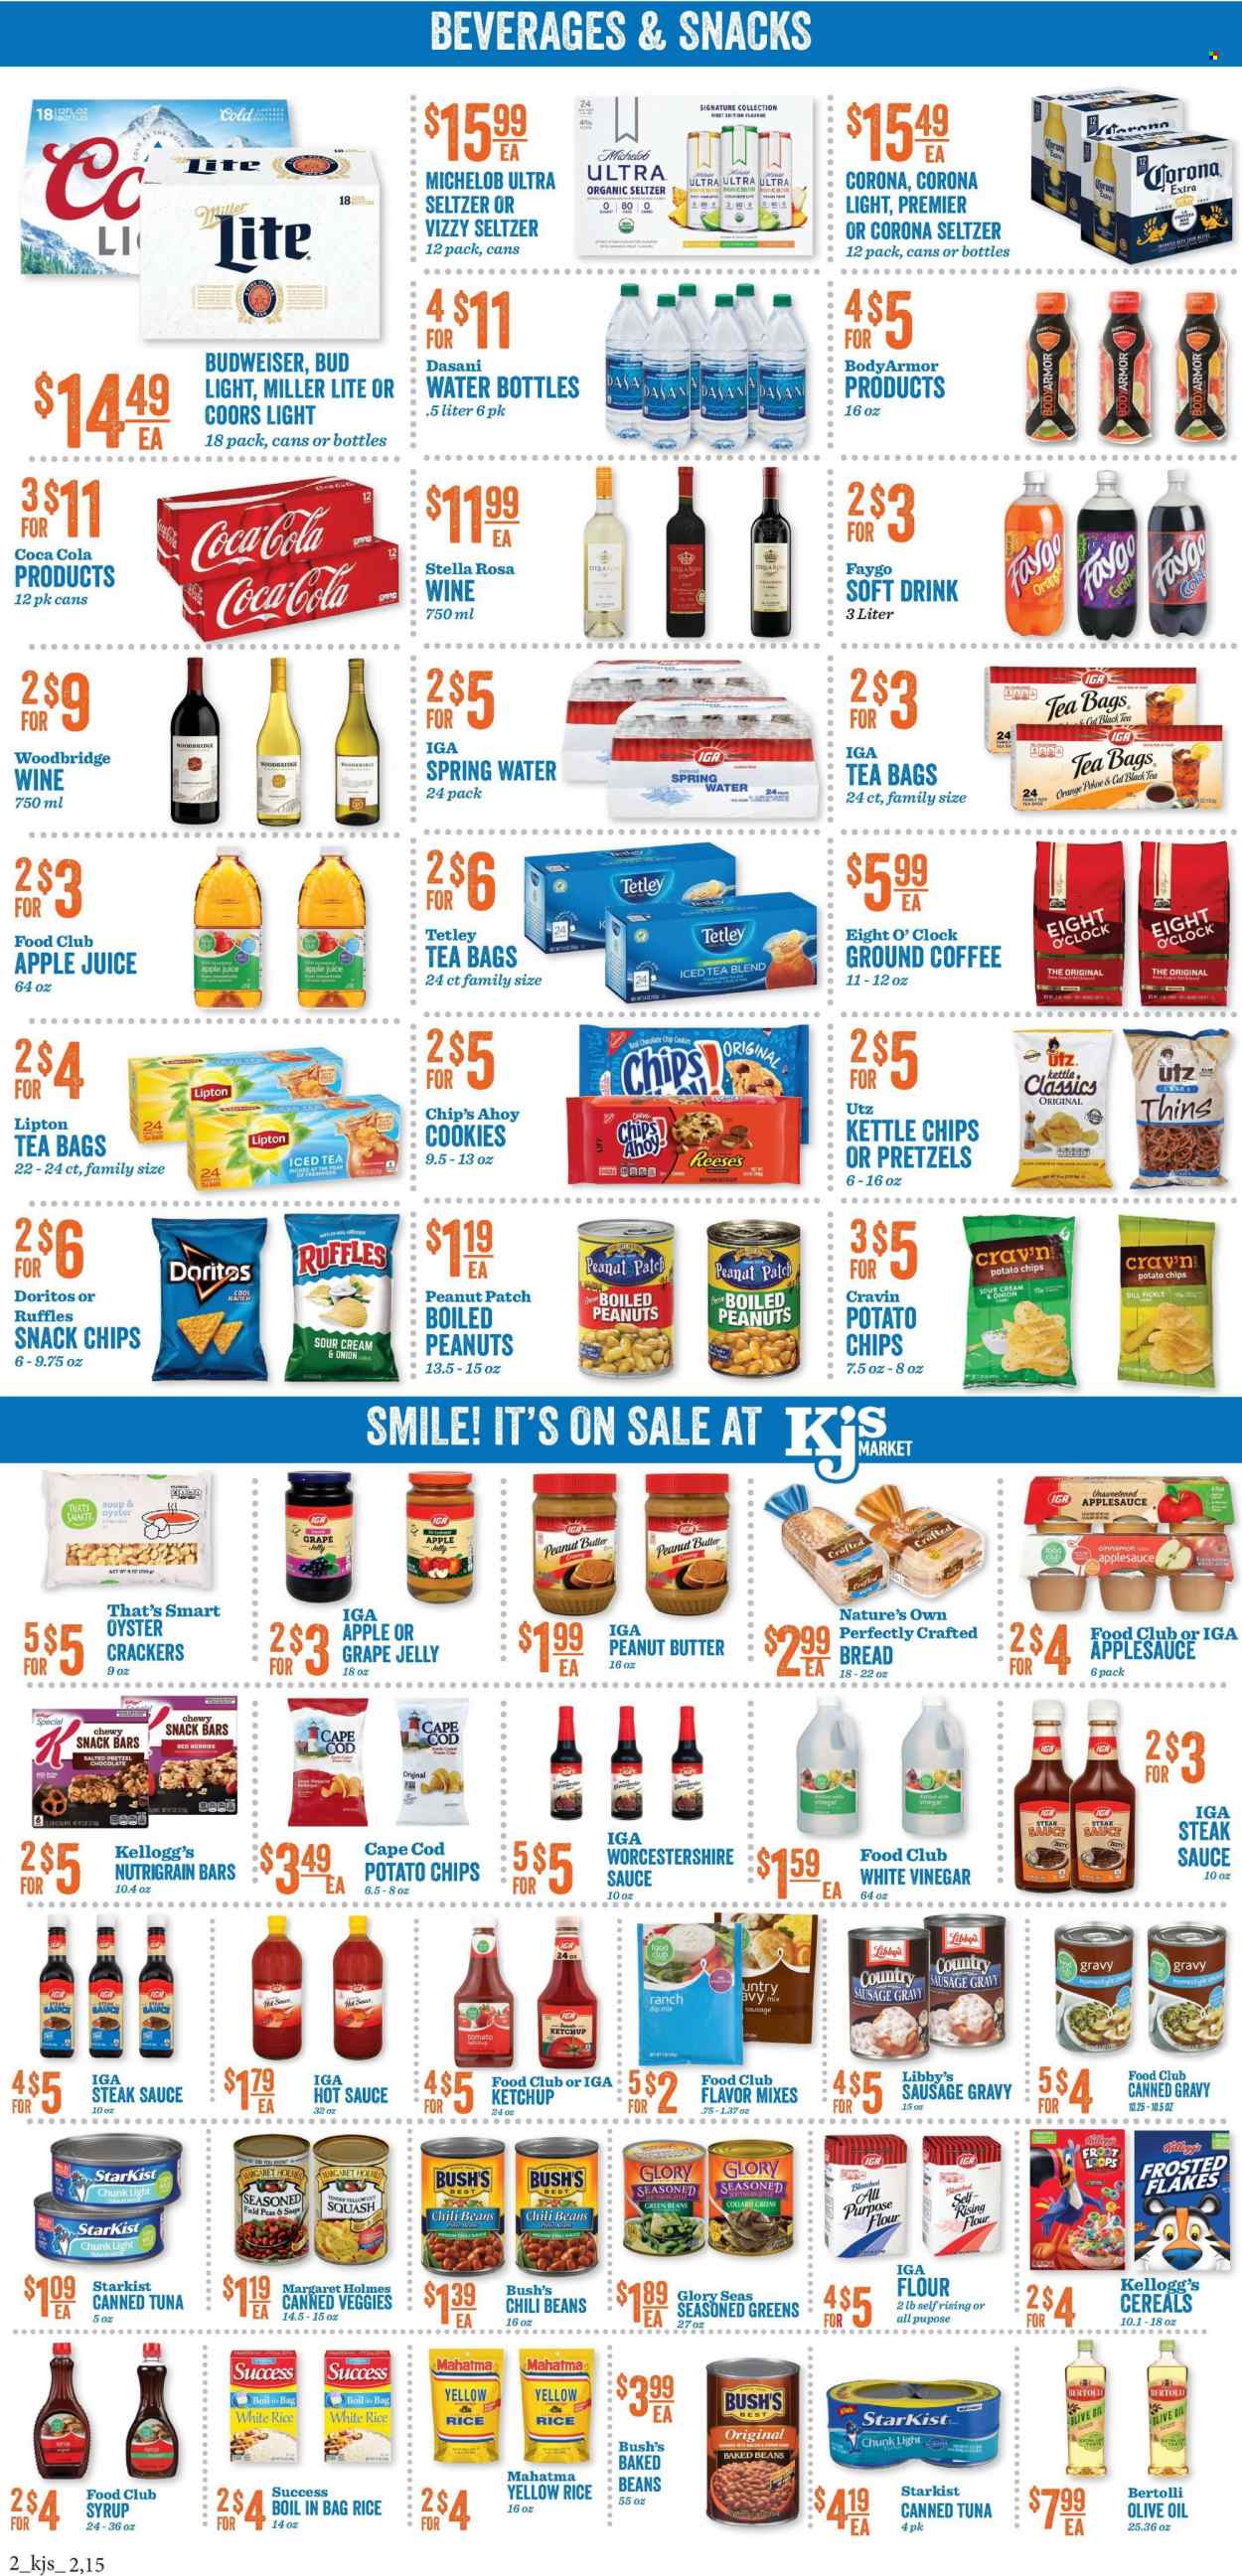 thumbnail - KJ´s Market Flyer - 01/19/2022 - 01/25/2022 - Sales products - bread, pretzels, collard greens, green beans, pears, oranges, cod, tuna, oysters, StarKist, sausage gravy, soup, Bertolli, sausage, dip, Reese's, cookies, snack, jelly, crackers, Kellogg's, snack bar, Nutri-Grain bars, dill pickle, Doritos, potato chips, chips, Thins, Ruffles, all purpose flour, flour, sugar, oyster crackers, canned tuna, pinto beans, chili beans, baked beans, cereals, Frosted Flakes, rice, white rice, dill, cinnamon, steak sauce, worcestershire sauce, hot sauce, ketchup, chilli sauce, peanut oil, olive oil, oil, apple jelly, apple sauce, grape jelly, peanut butter, syrup, peanuts, apple juice, Coca-Cola, juice, Lipton, soft drink, spring water, tea bags, coffee, ground coffee, Eight O'Clock, Woodbridge, beer, Bud Light, Corona Extra, steak, drink bottle, cup, Nature's Own, Budweiser, Miller Lite, Coors, Michelob. Page 2.